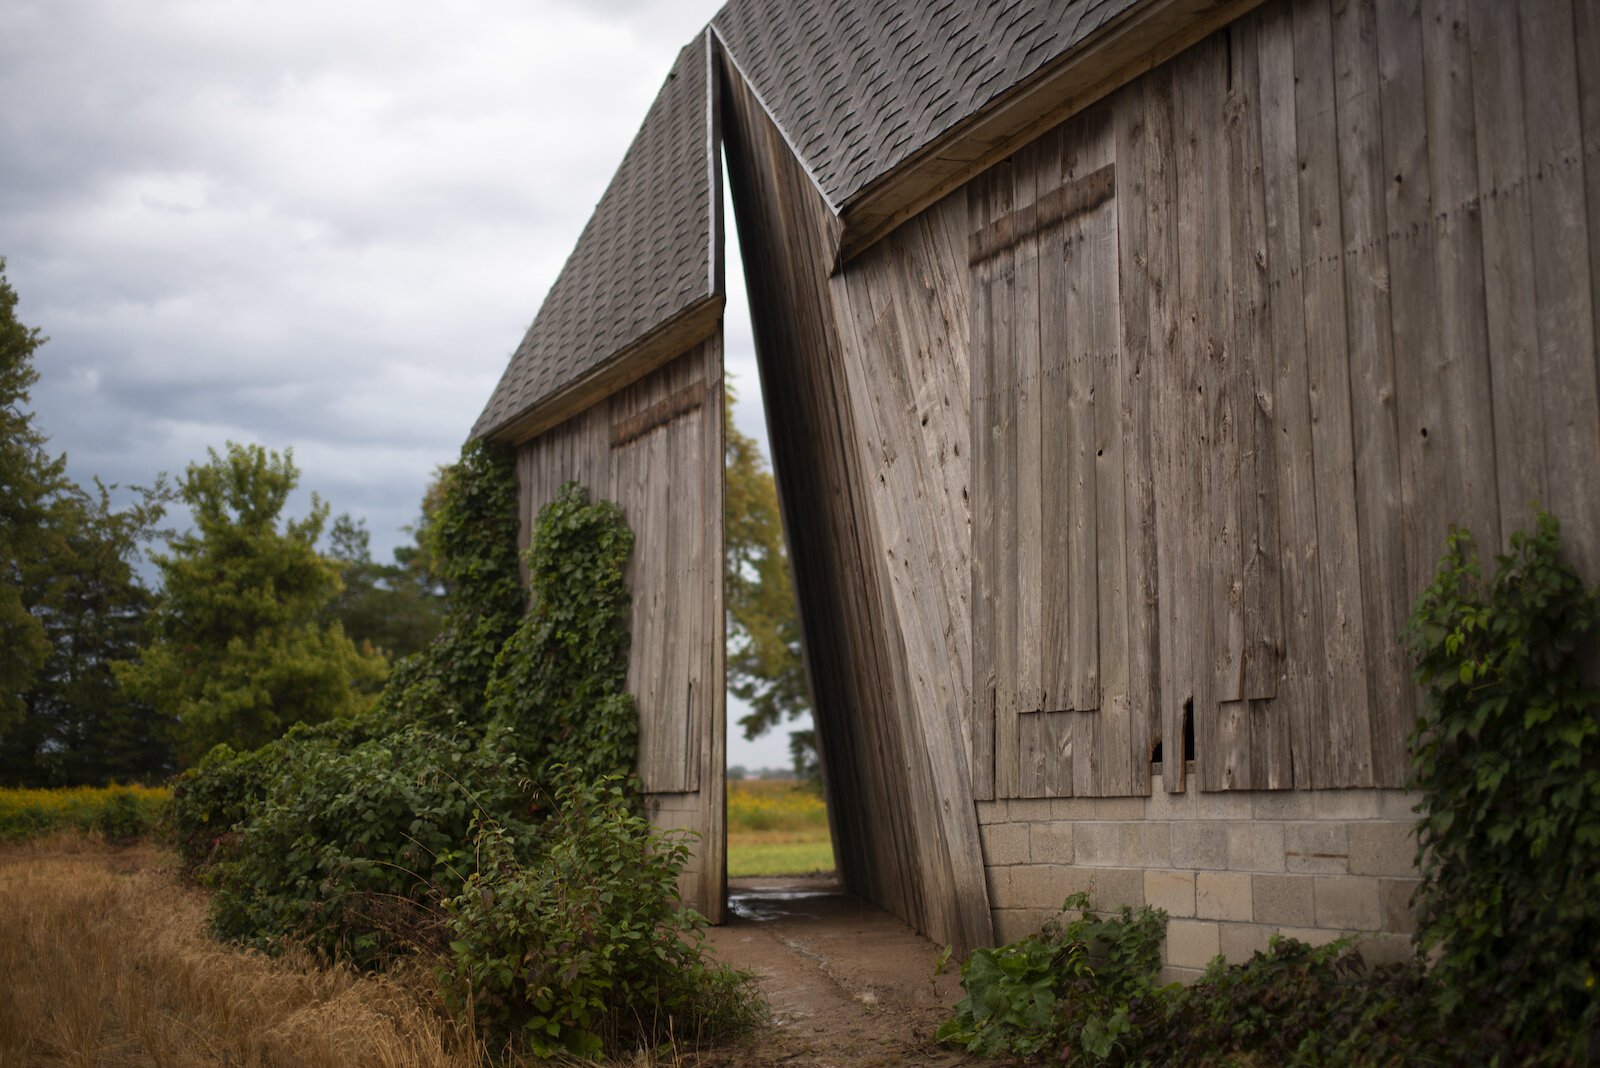 The Secret Sky Barn project in Hume Township